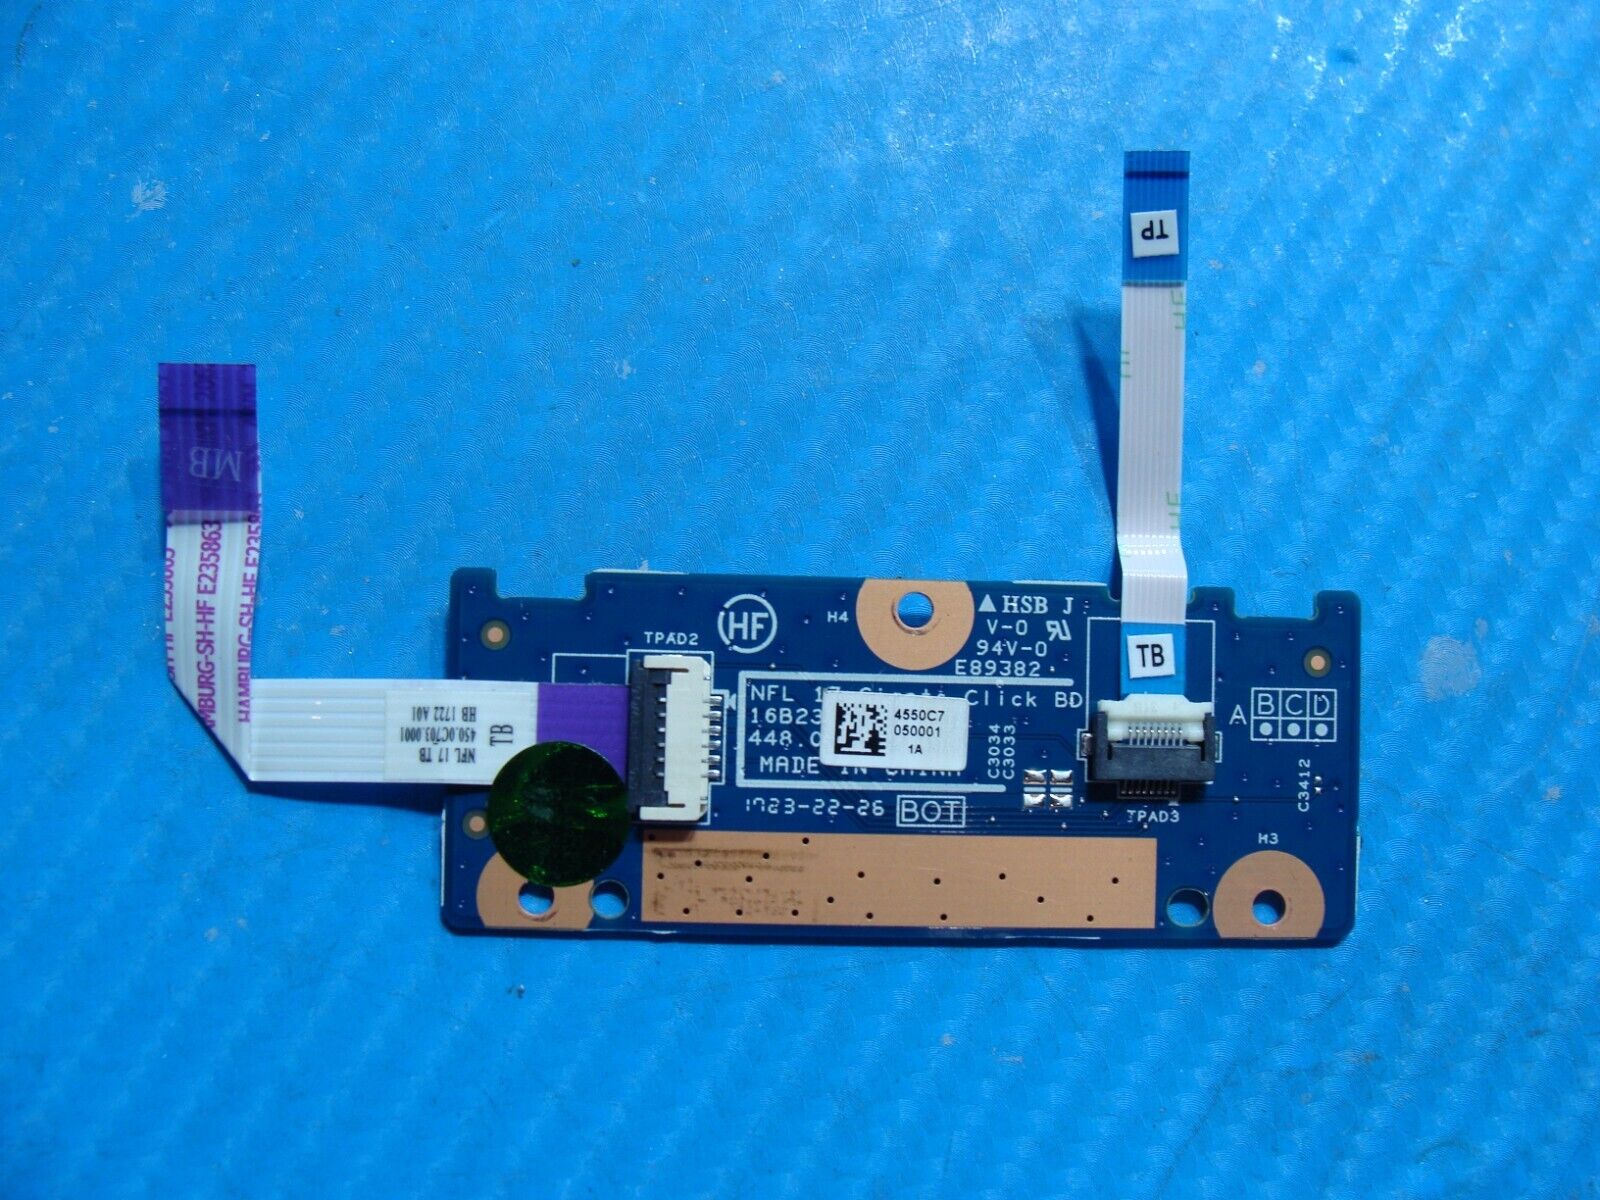 HP 17.3” 17-bs020nr OEM Touchpad Mouse Button Board w/Cable 450.0C704.0021